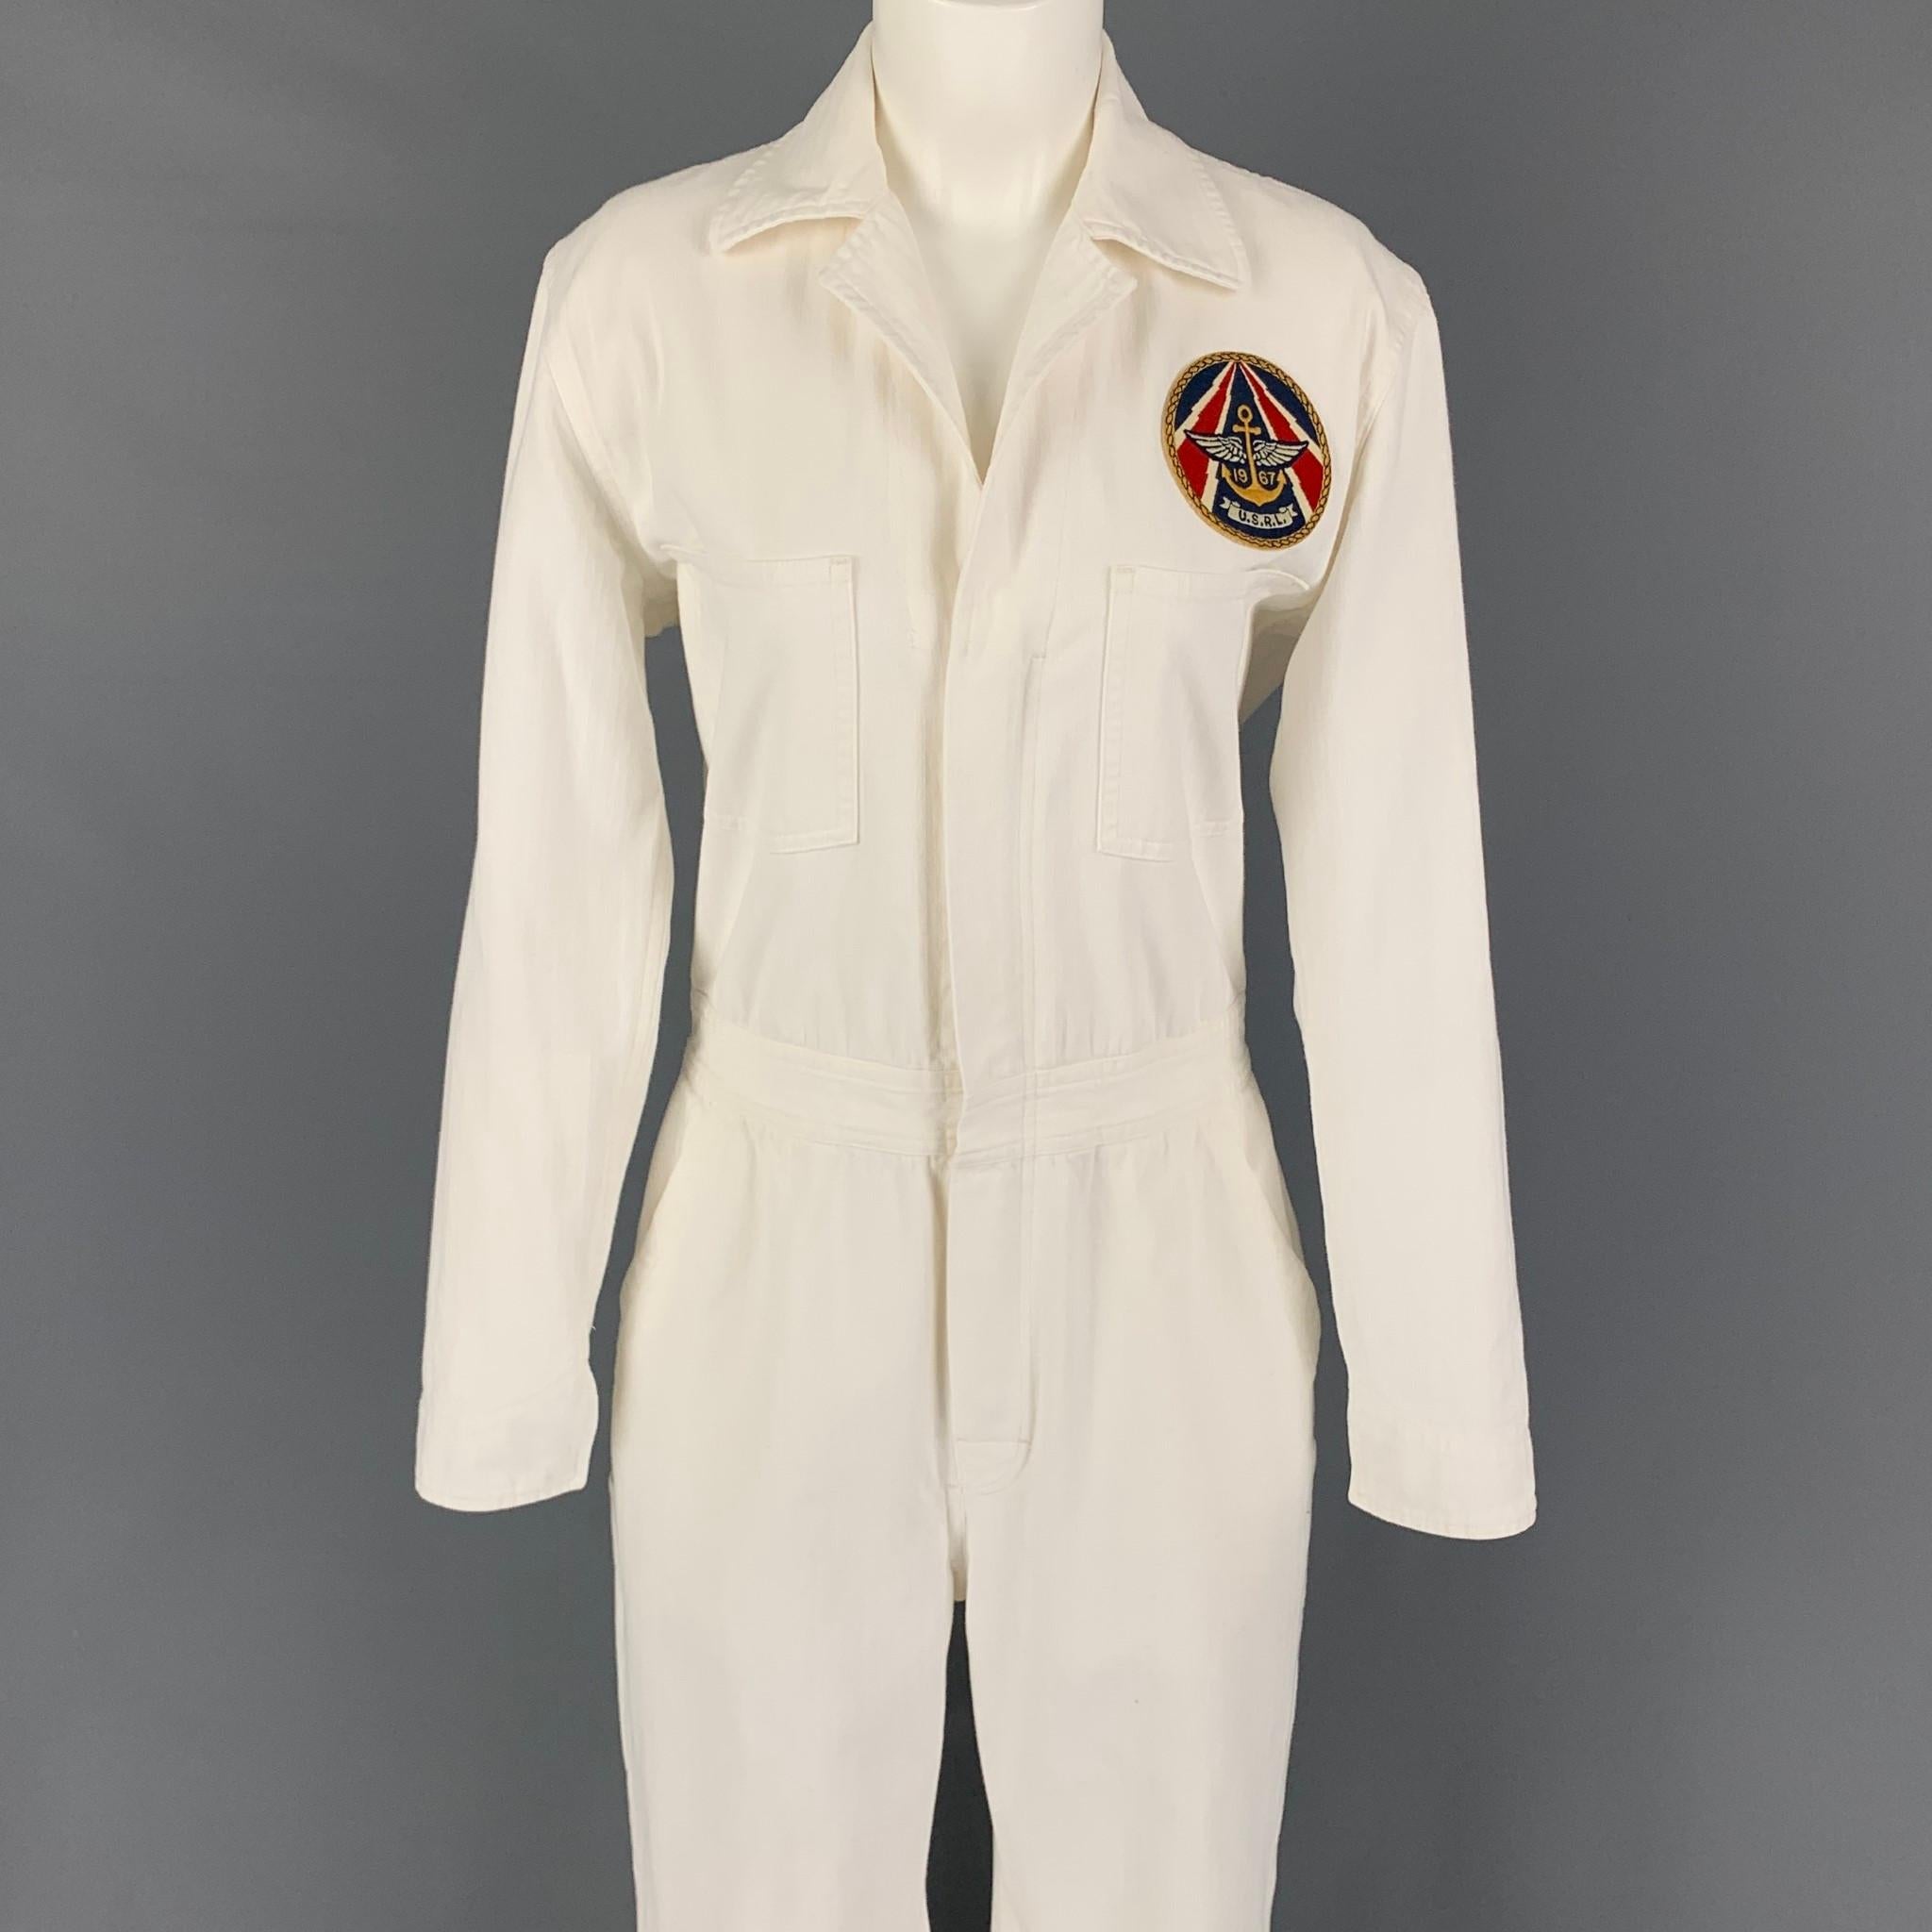 RALPH LAUREN Collection jumpsuit comes in a cream cotton featuring a camp collar, military patch, long sleeves, front pockets, and a zip up closure. 

Very Good Pre-Owned Condition.
Marked: 8

Measurements:

Shoulder: 16 in.
Bust: 38 in.
Waist: 30